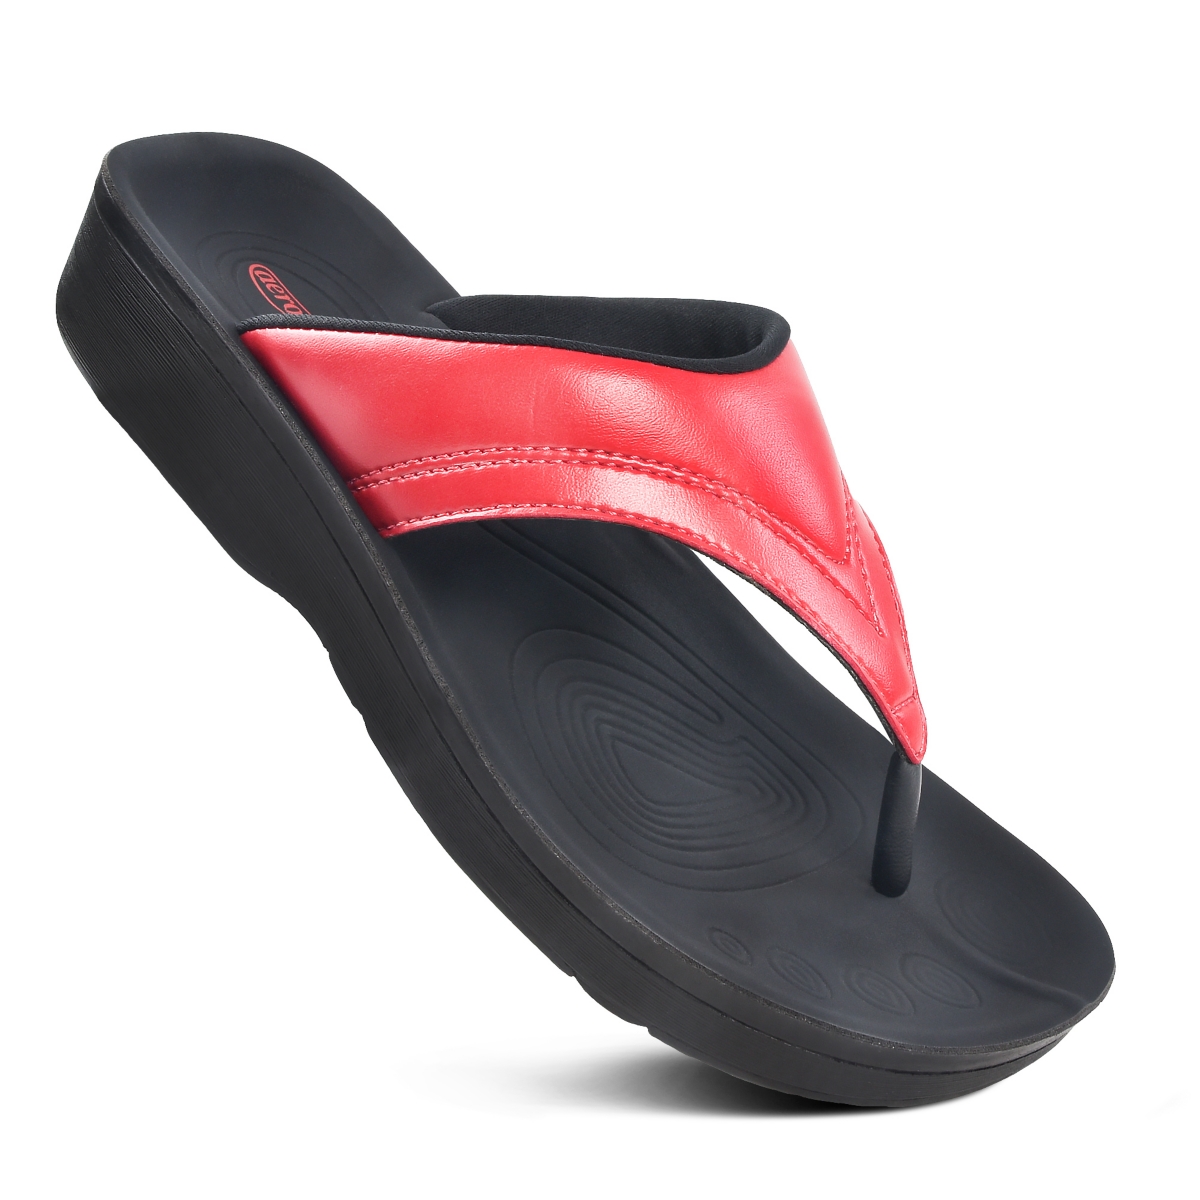 Ostrya Thong Sandals for Women - Red